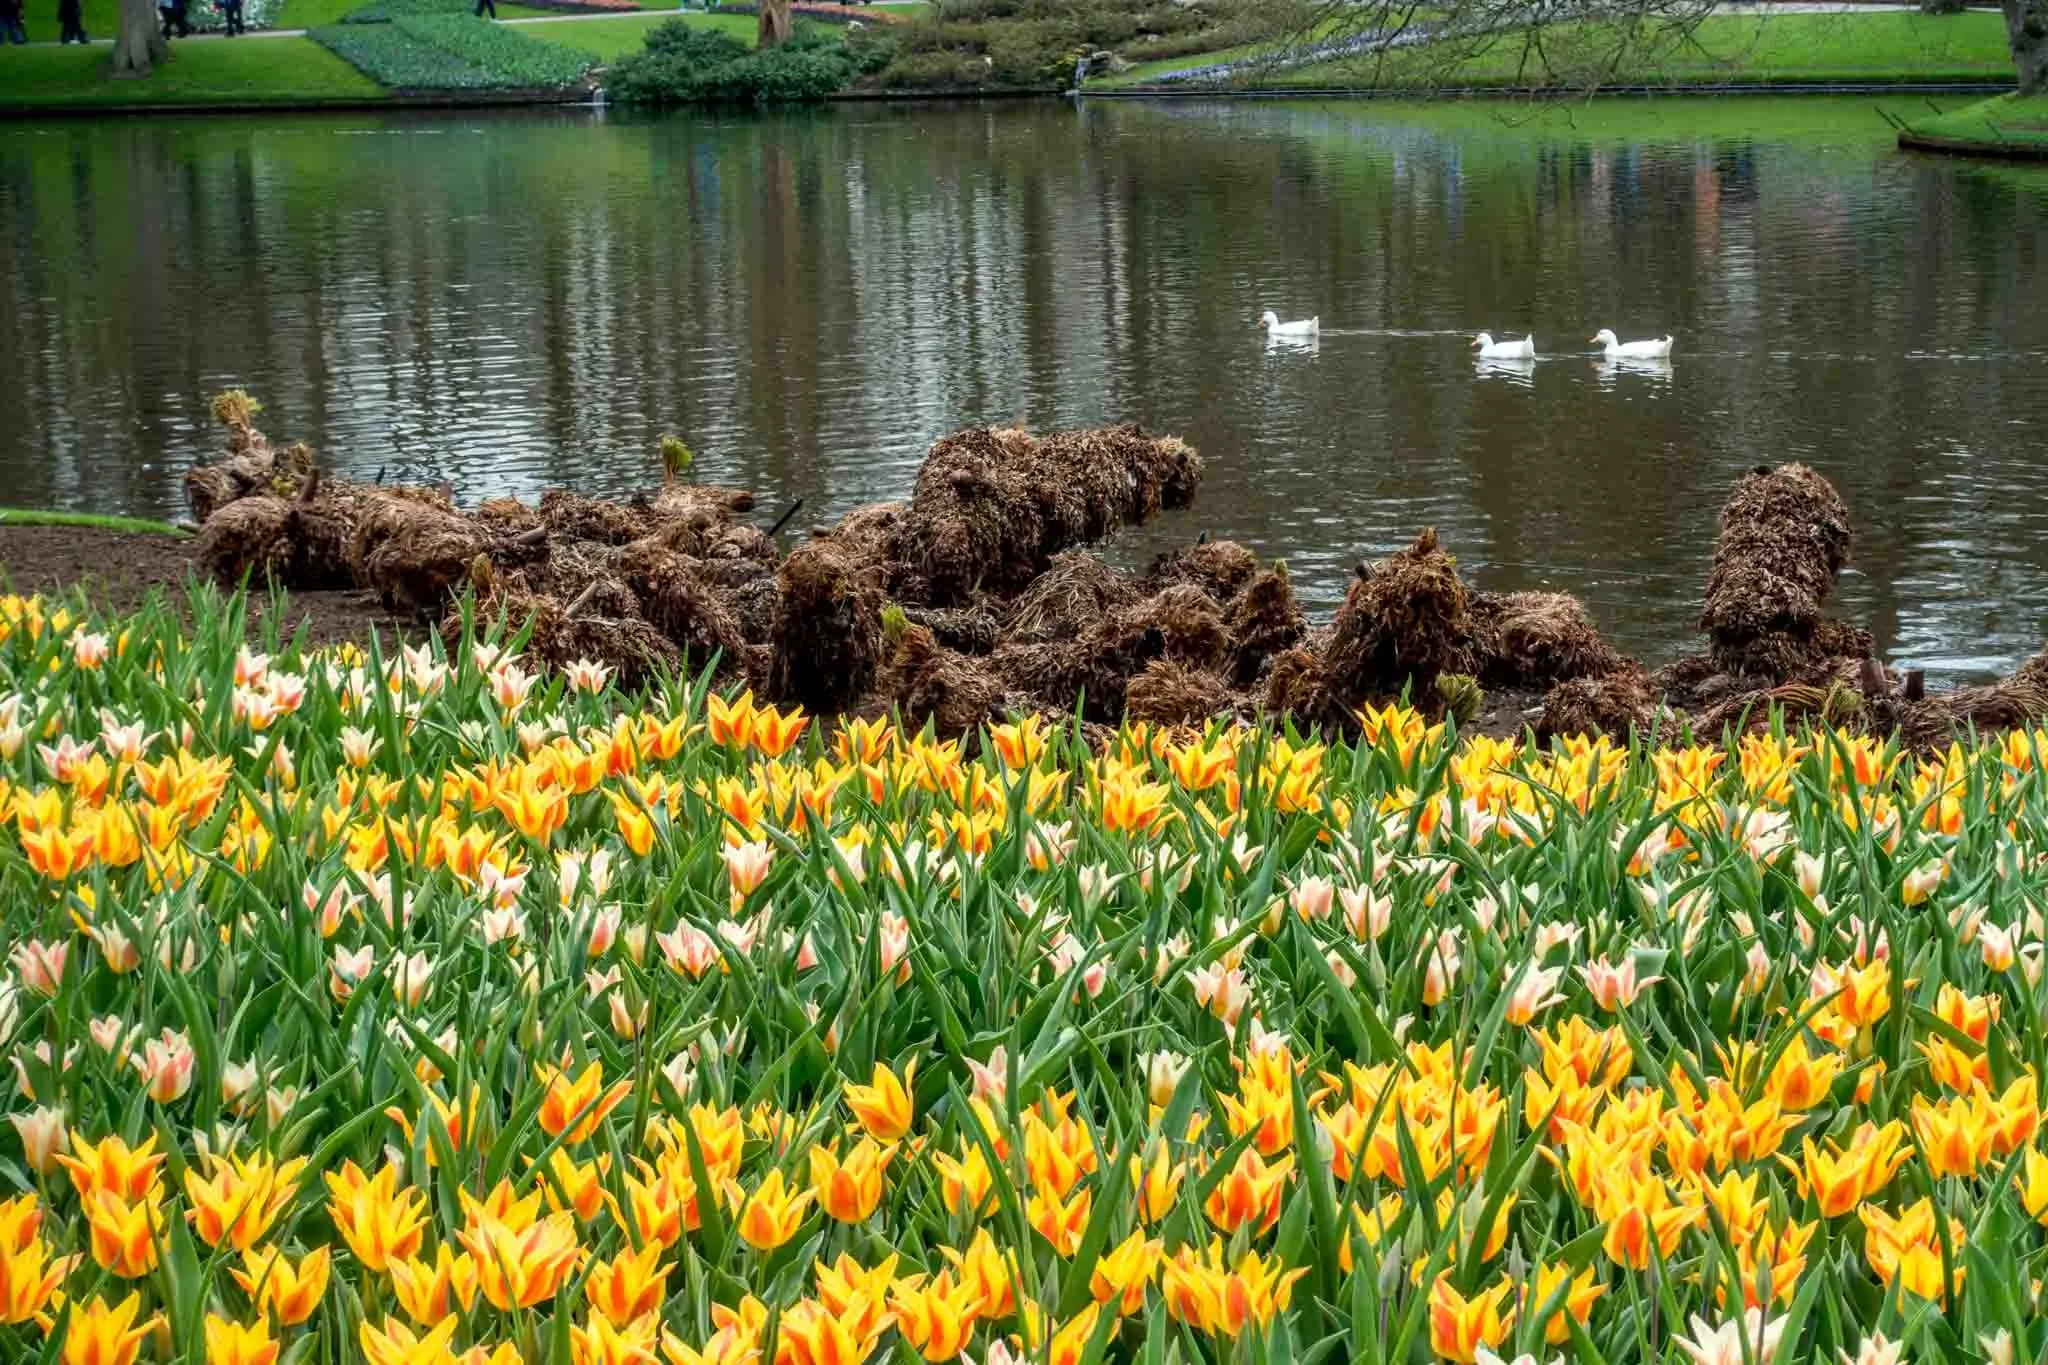 Tulips along a pond with ducks going by